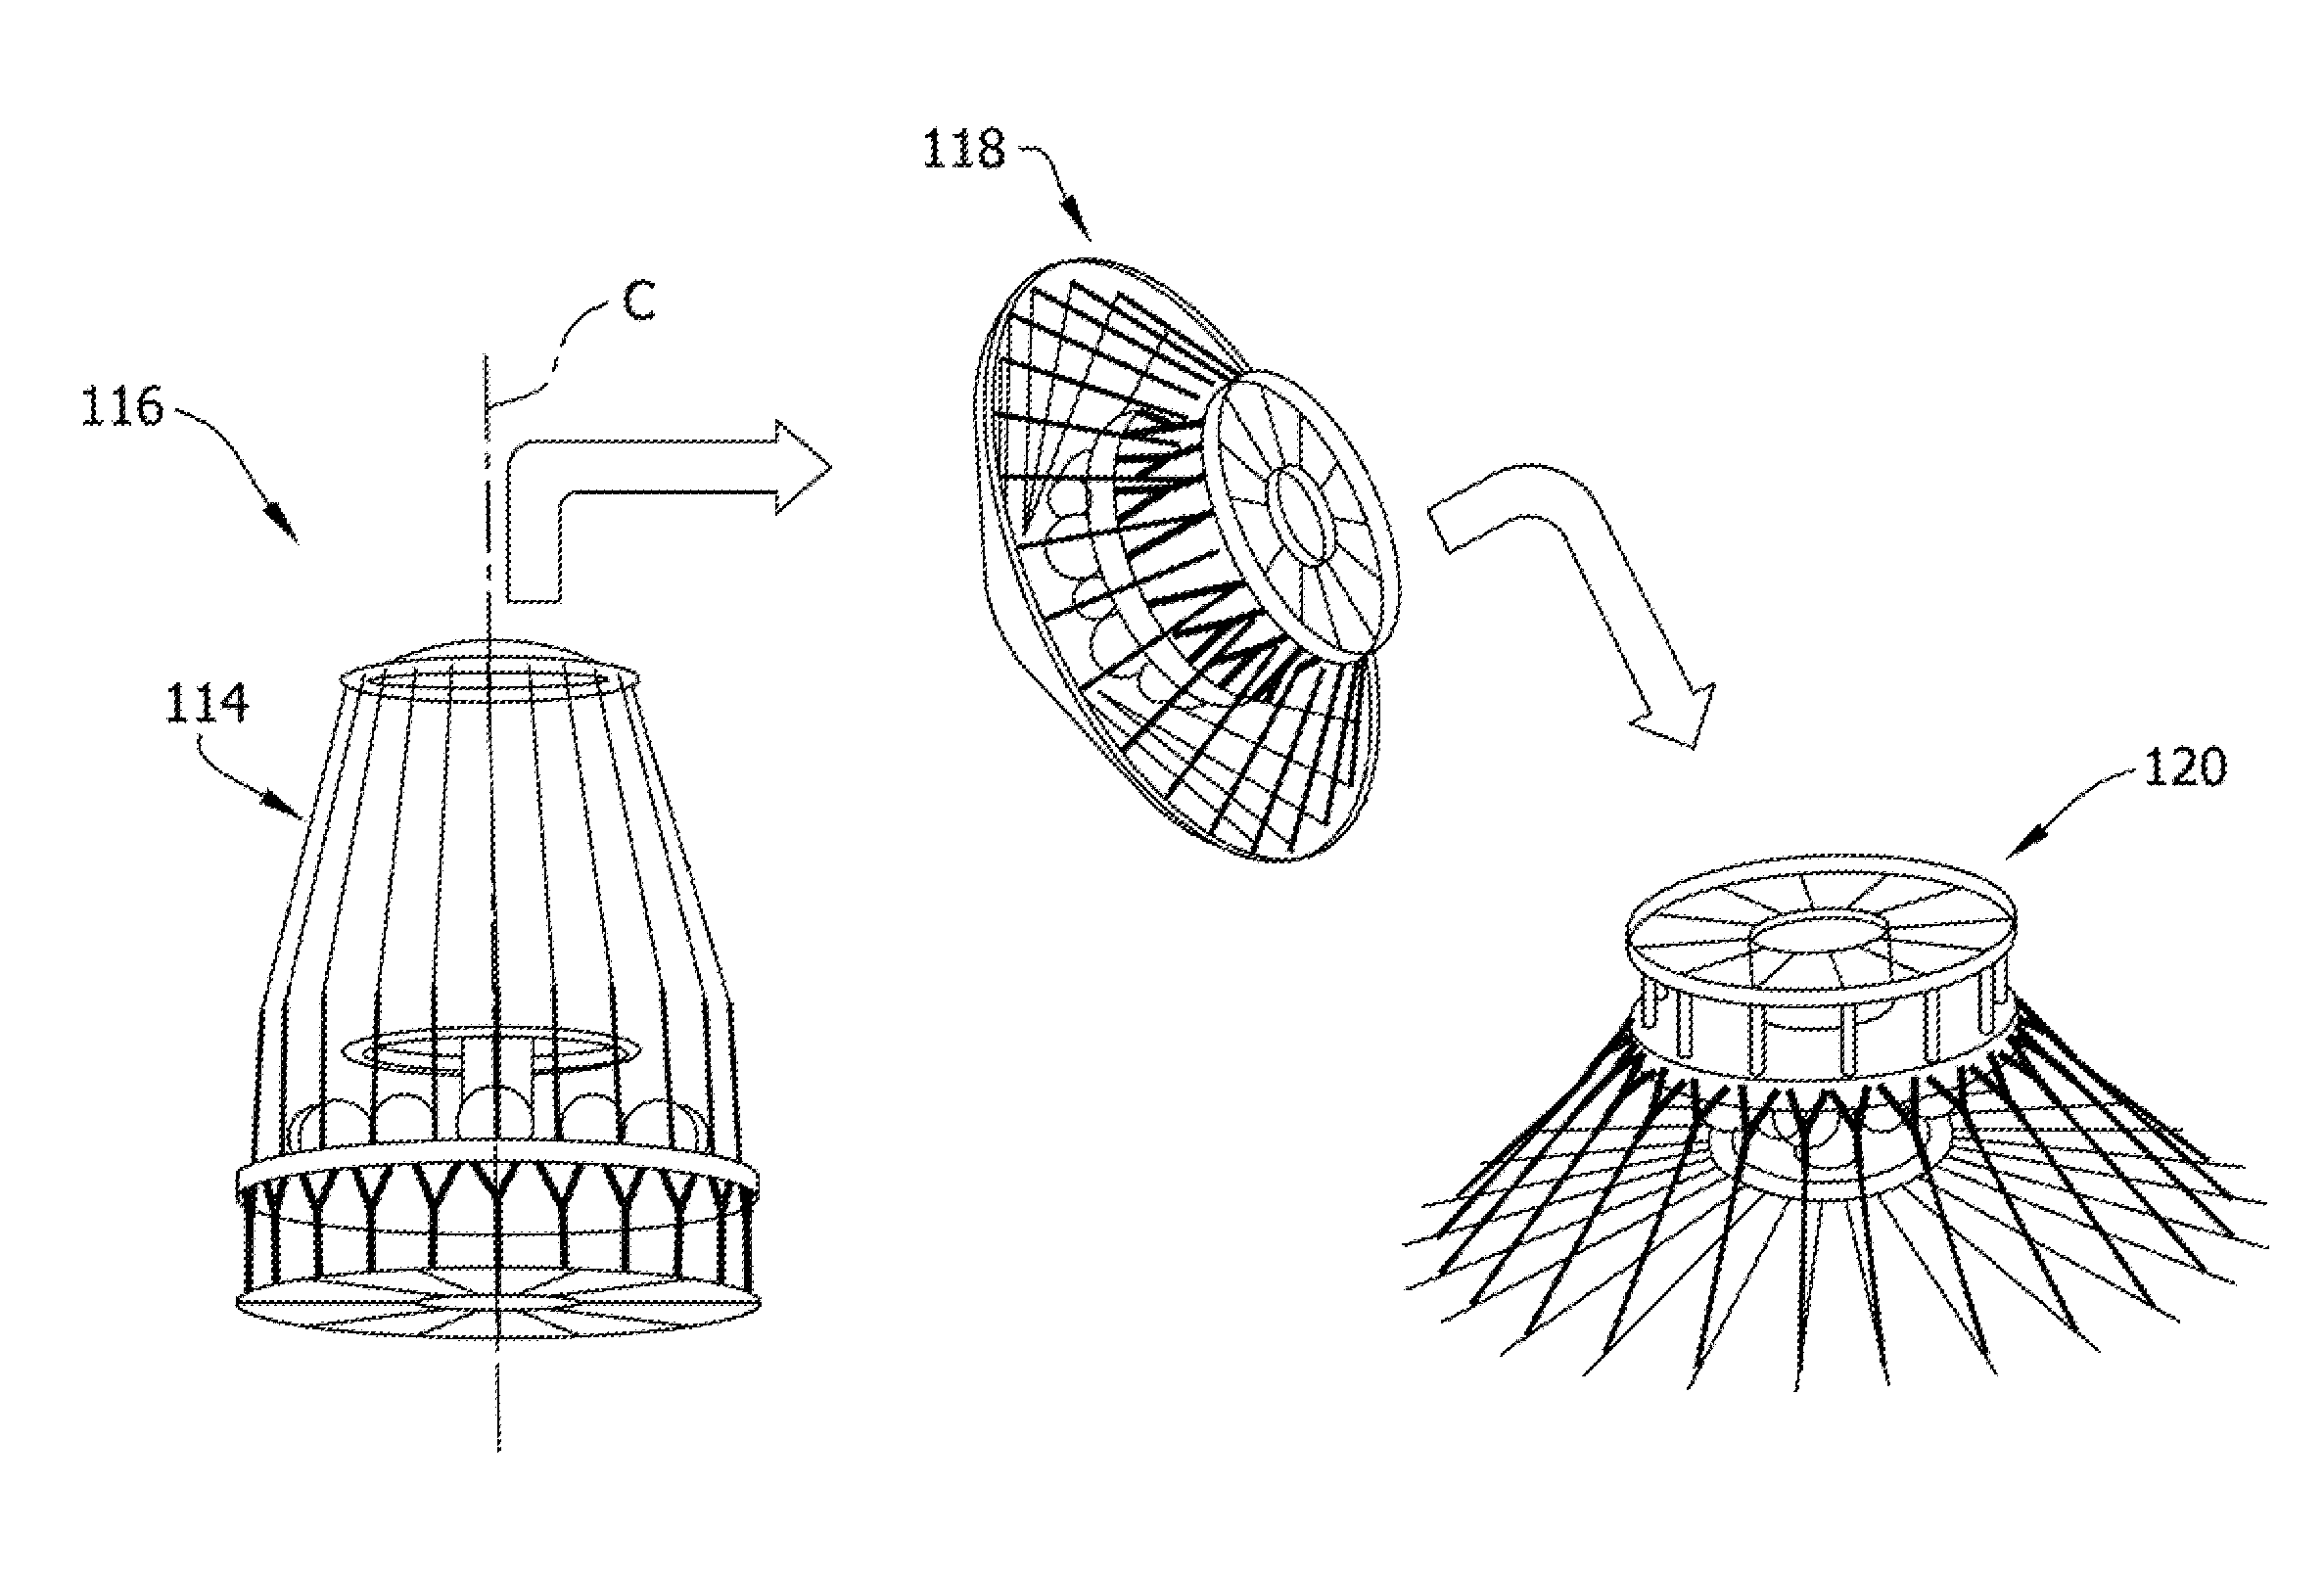 Transformable and reconfigurable entry, descent and landing systems and methods